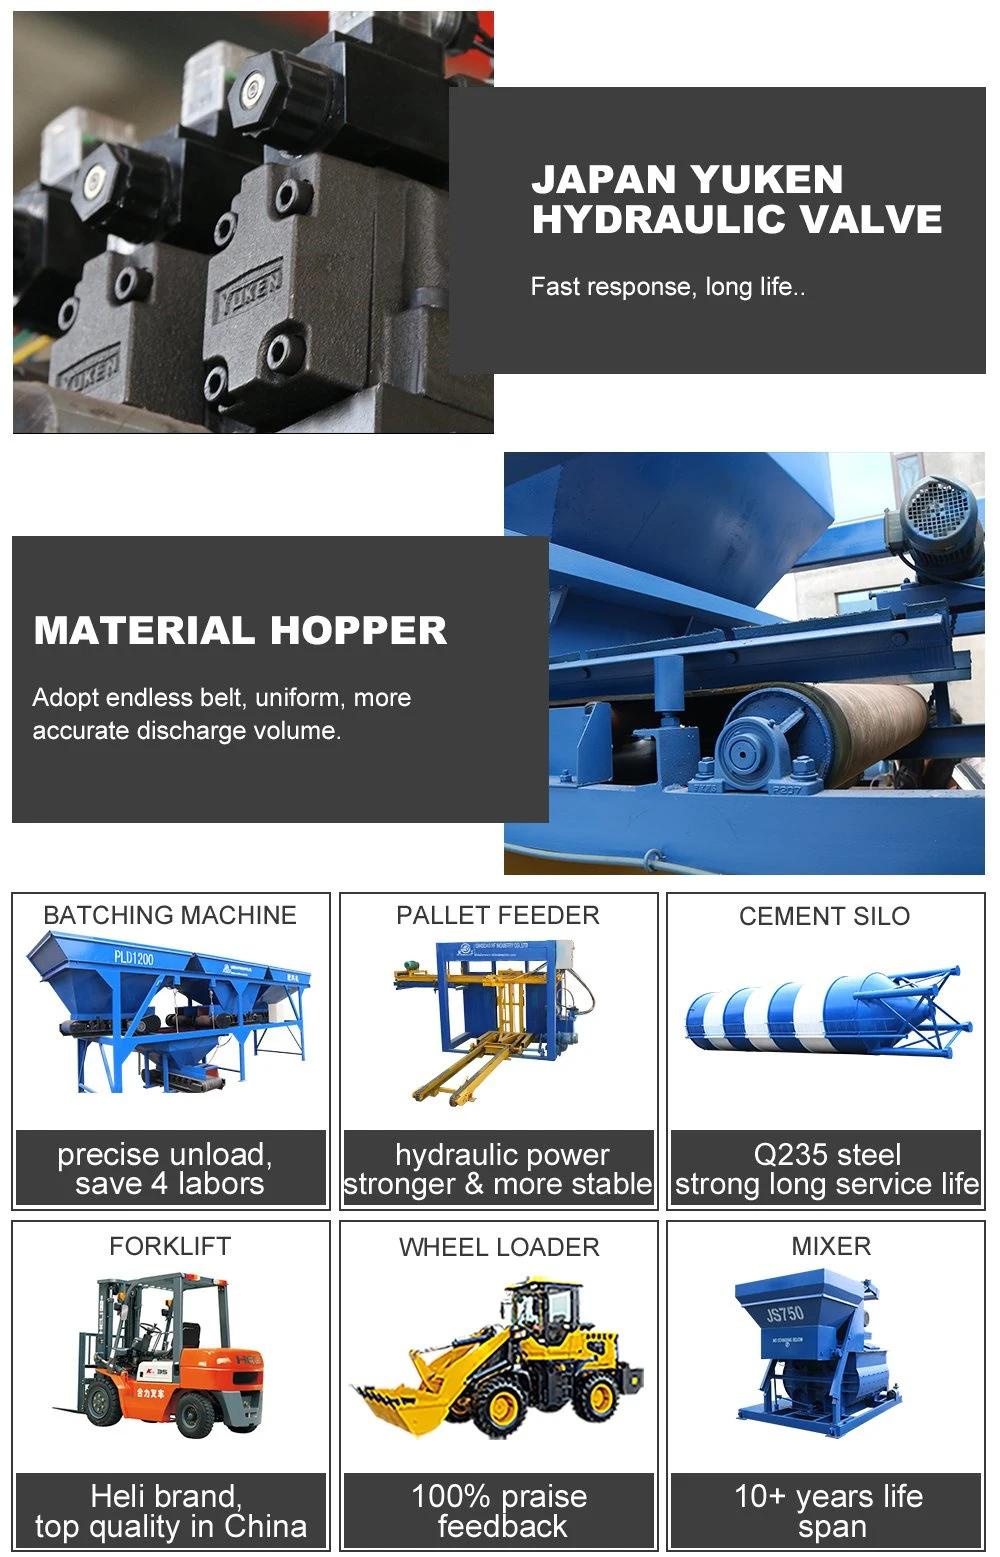 Automatic Concrete Block Making Machine for Construction with ISO Approved